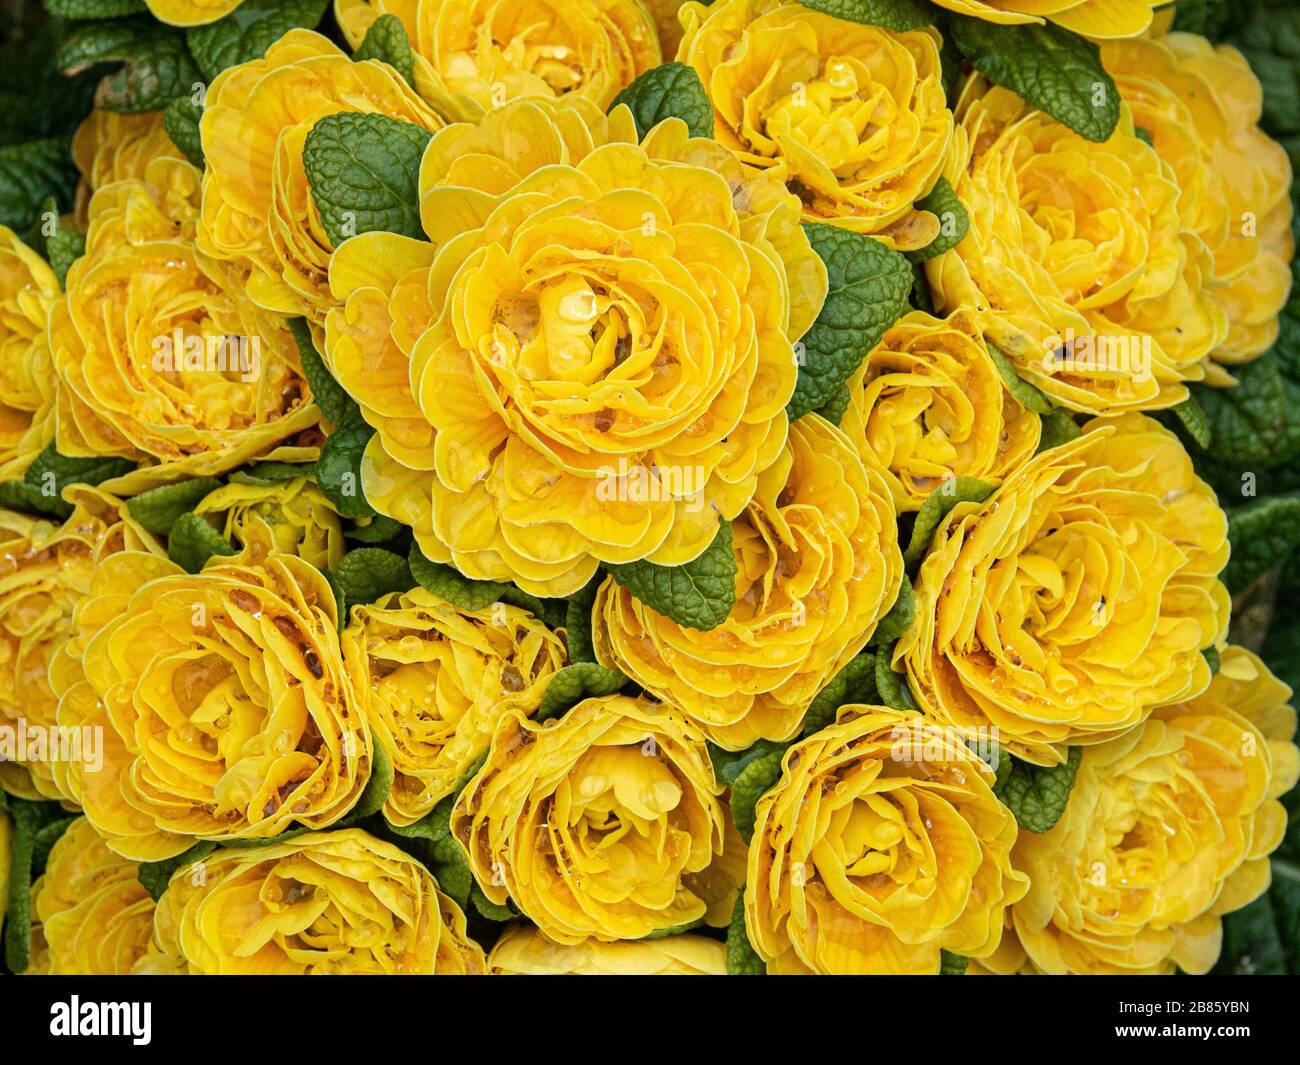 A close up of the bright yellow double flowers of the Primrose Belarina Goldie Stock Photo